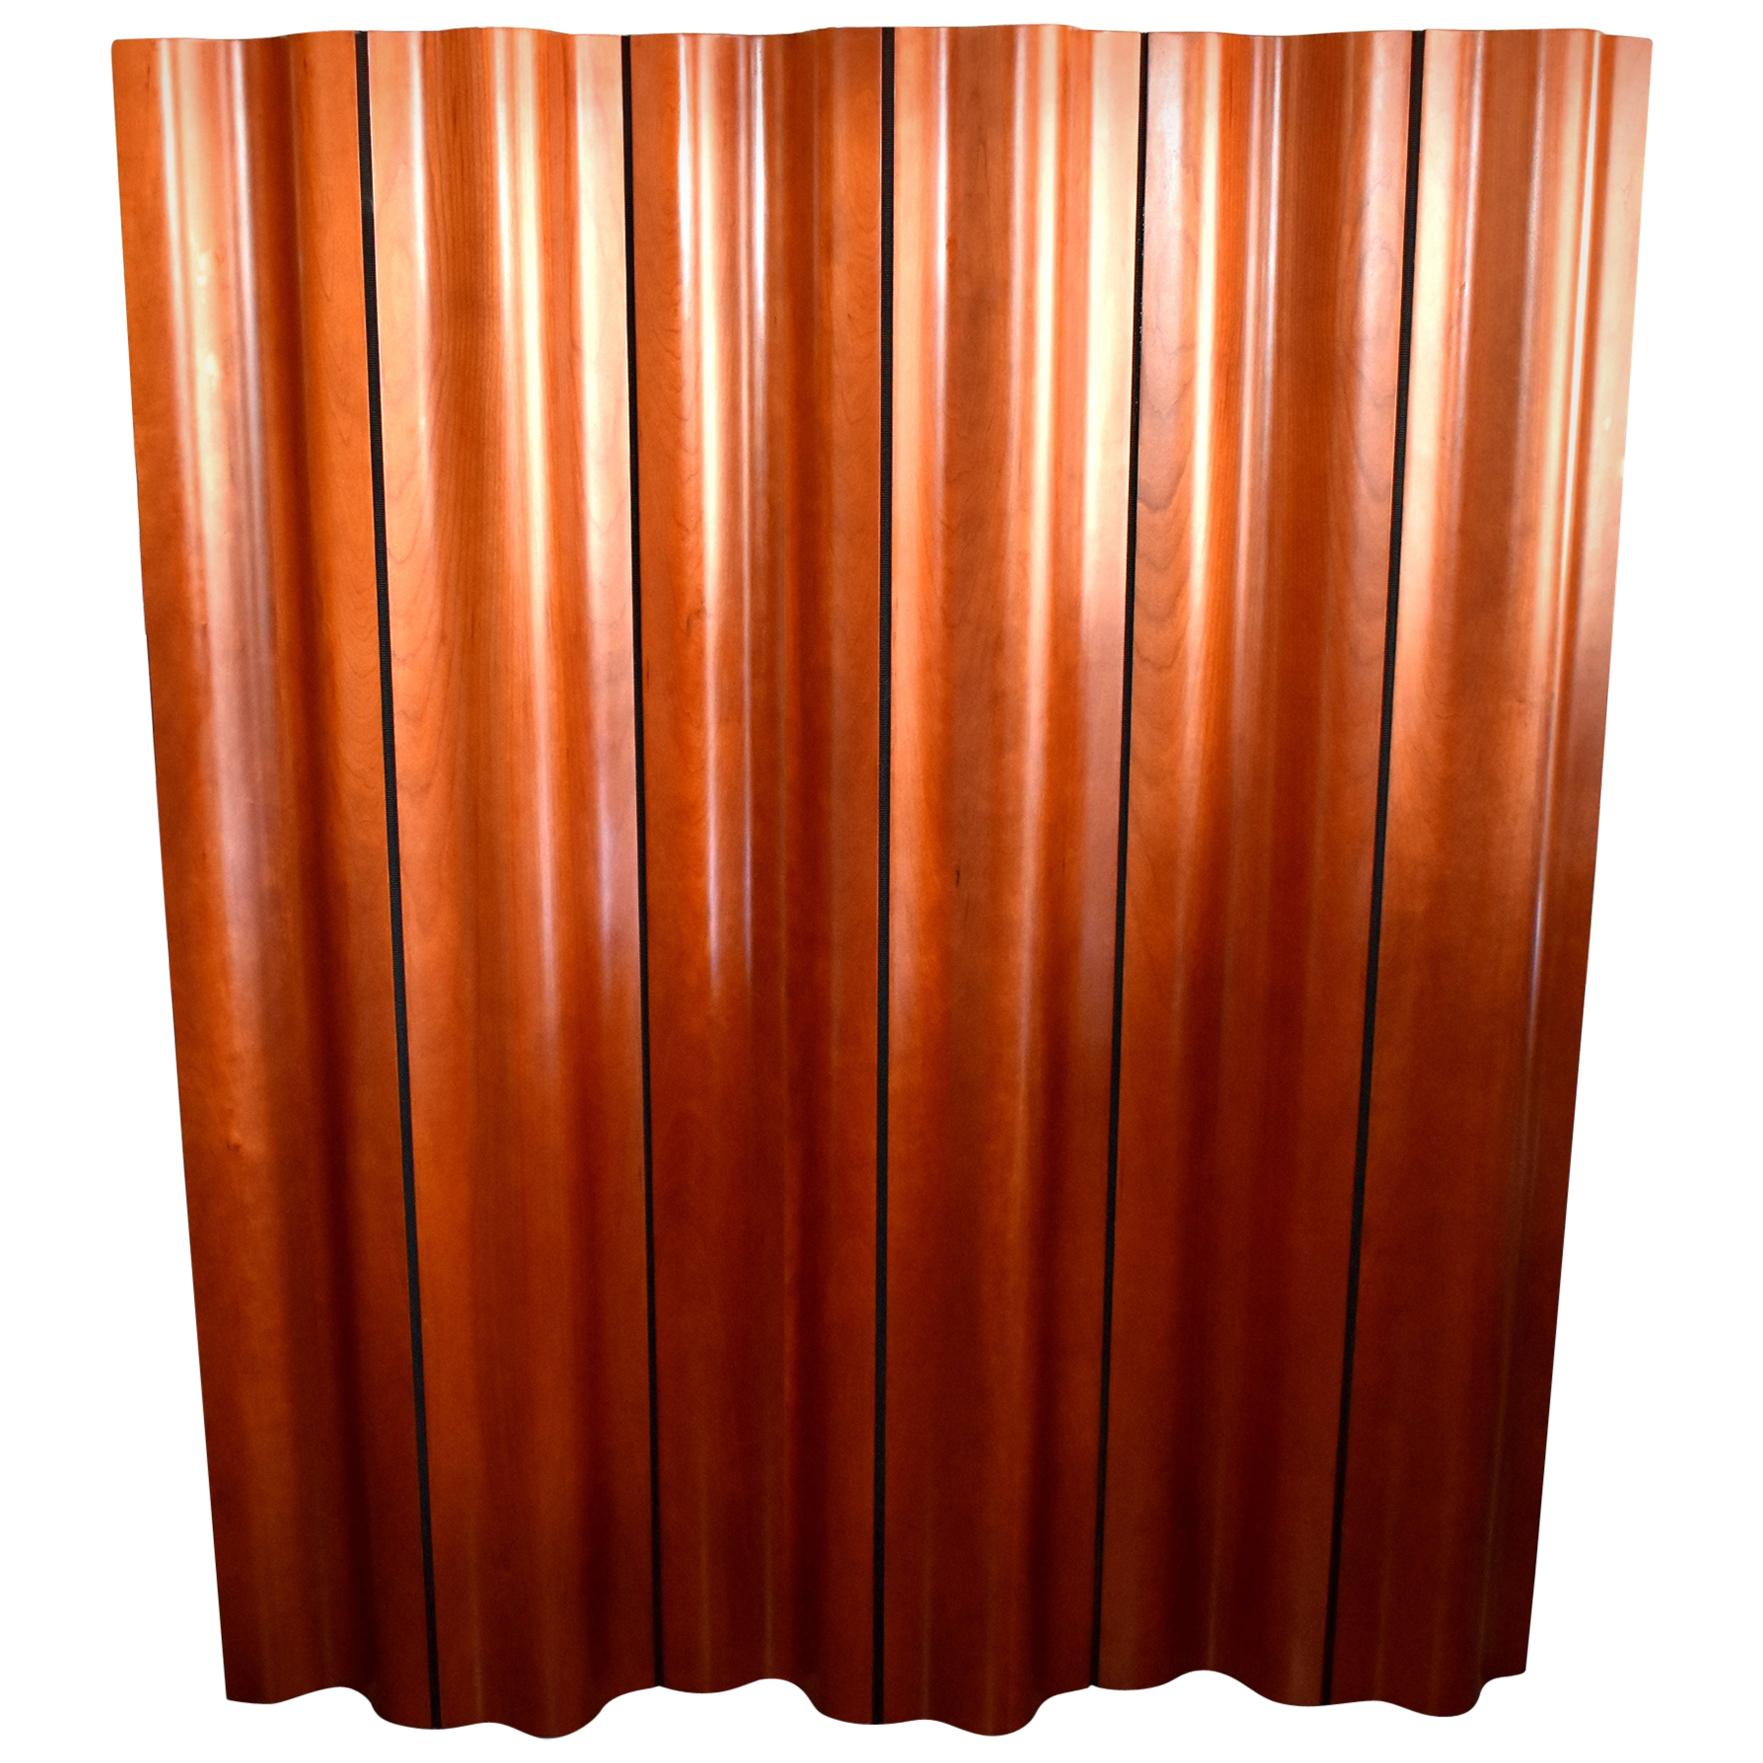 Eames for Herman Miller Molded Plywood Folding Screen